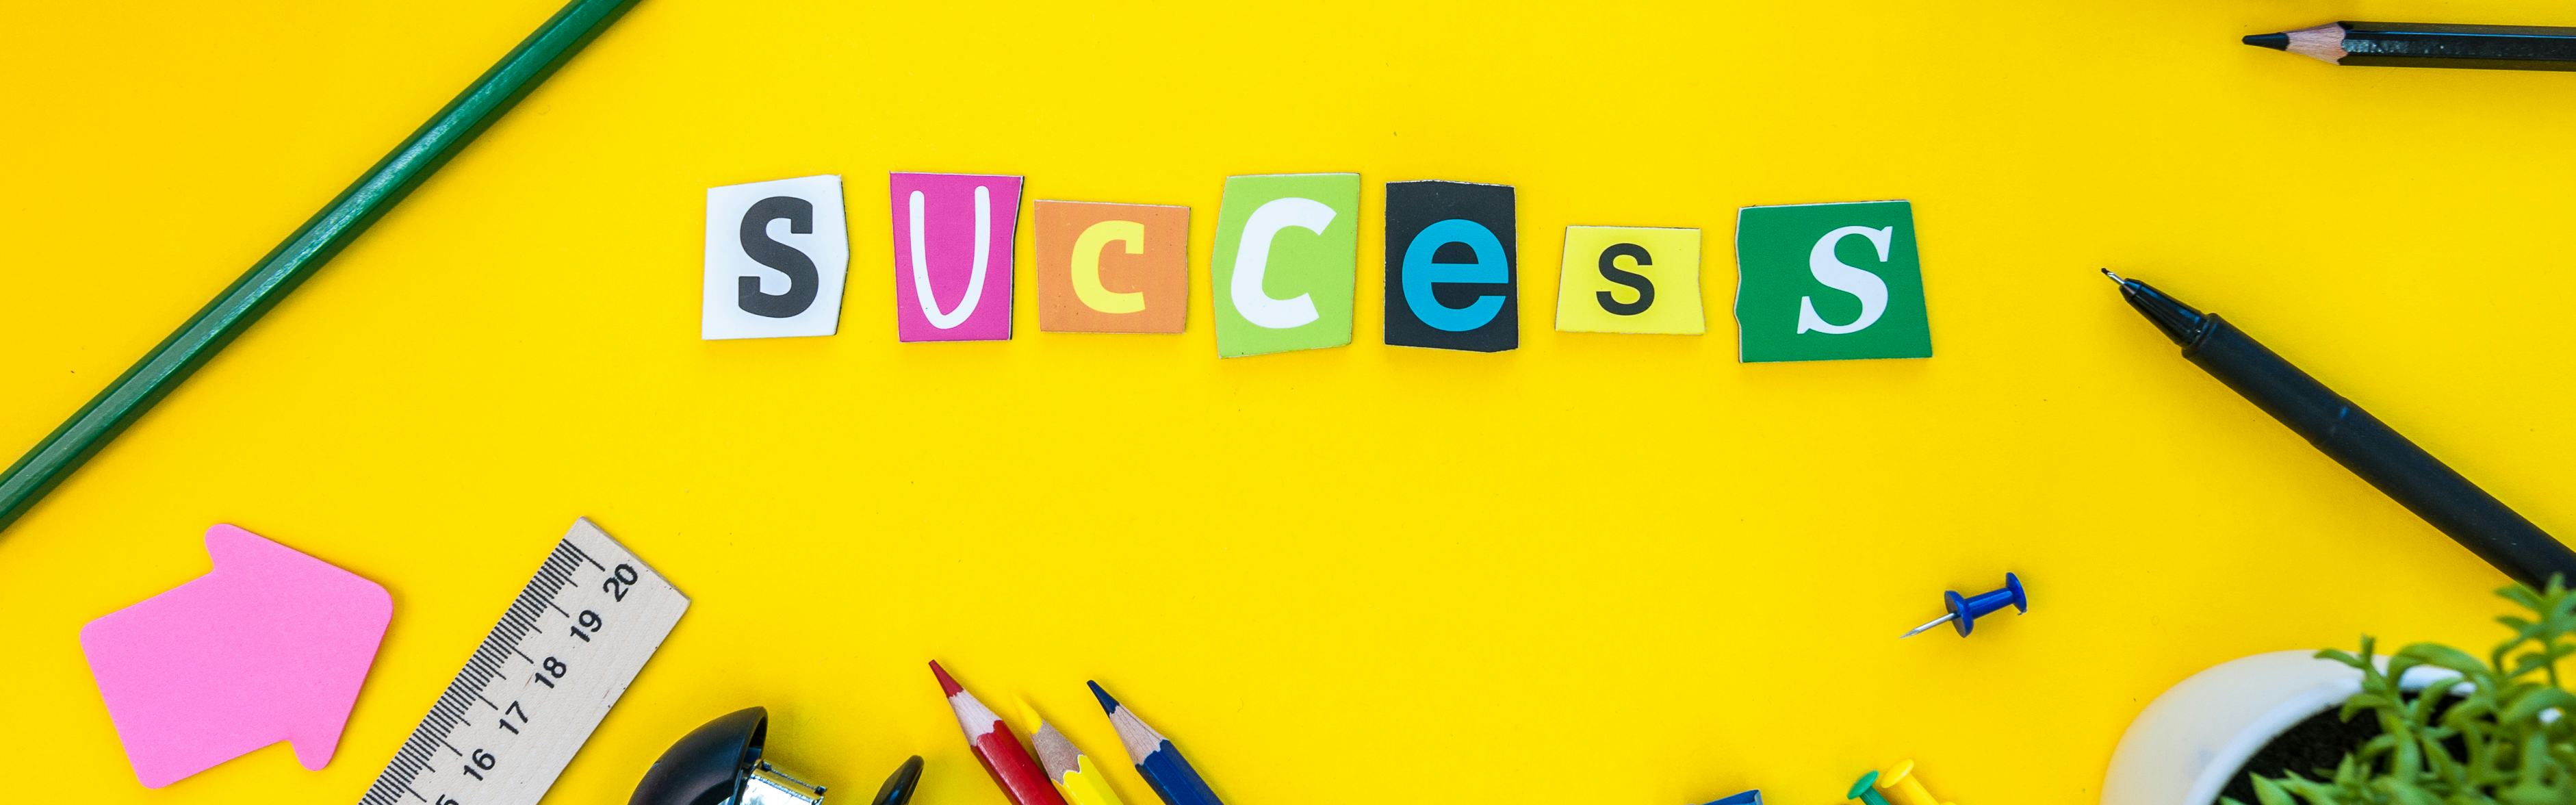 Success - text of carved letters at yellow table background with office or pupil supplies.